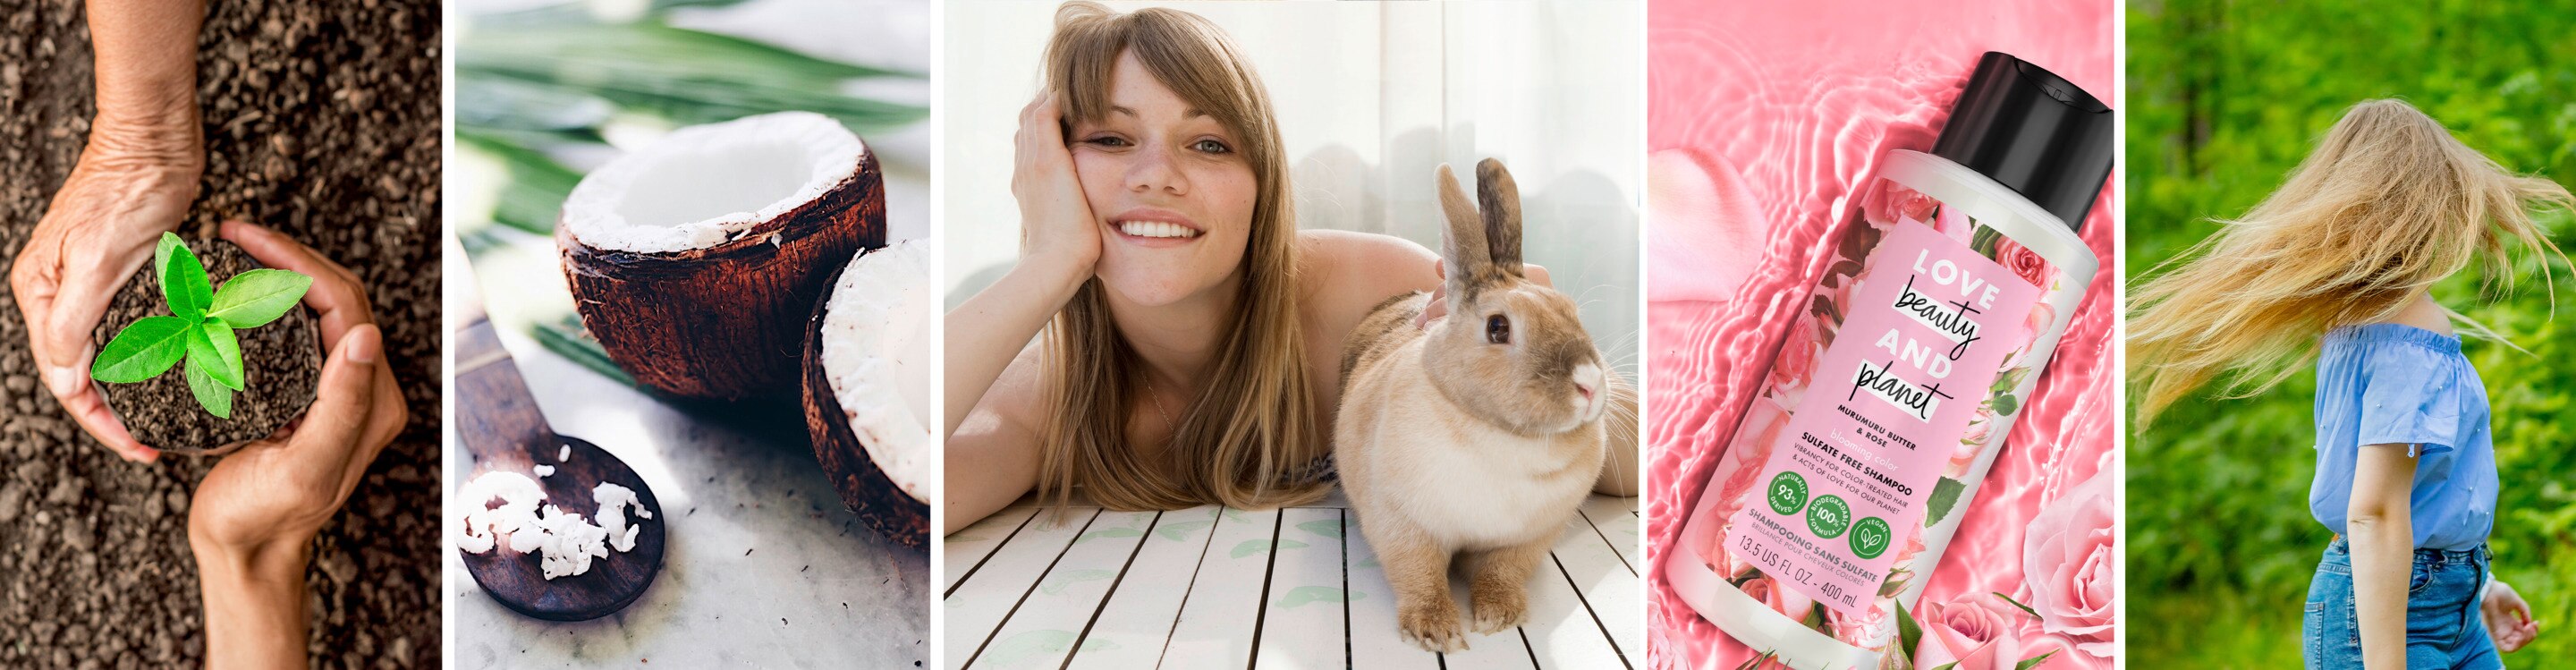 Why Choose Cruelty-Free Beauty Products